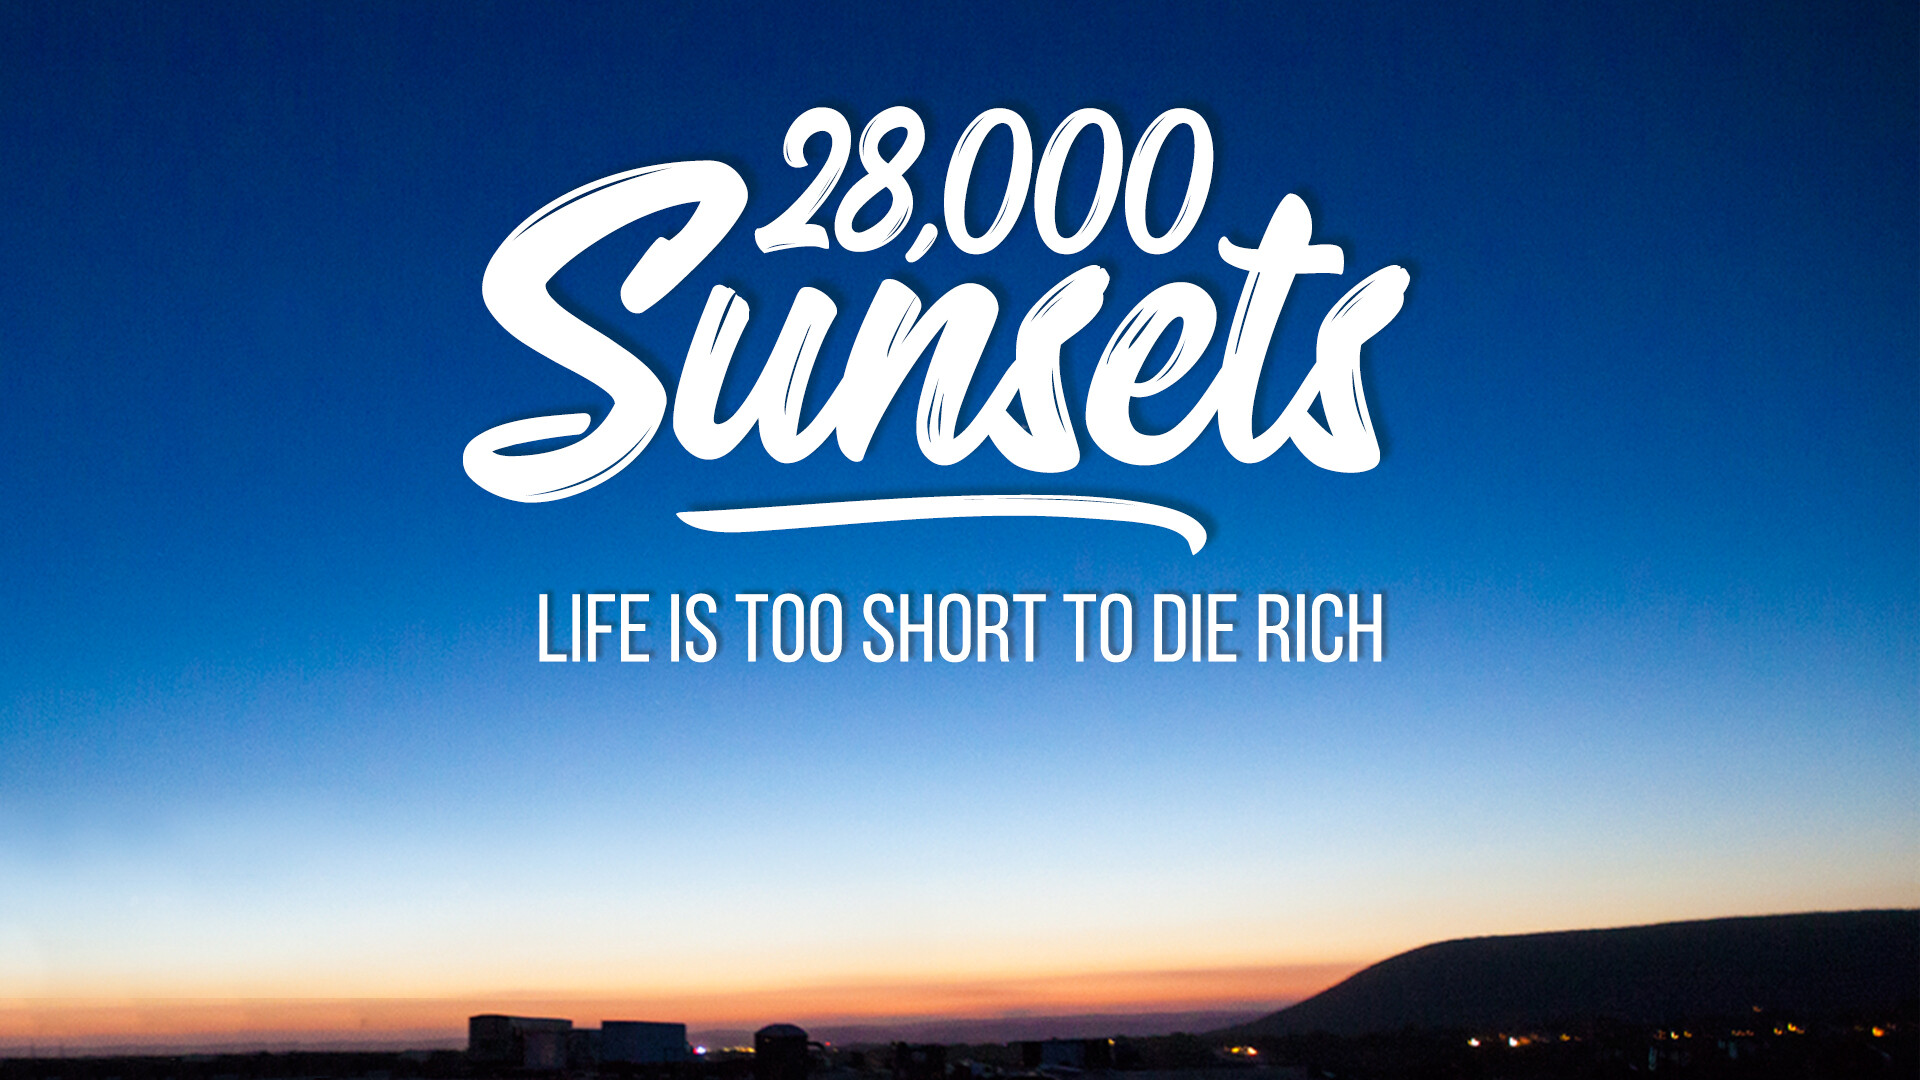 Life's Too Short to Die Rich